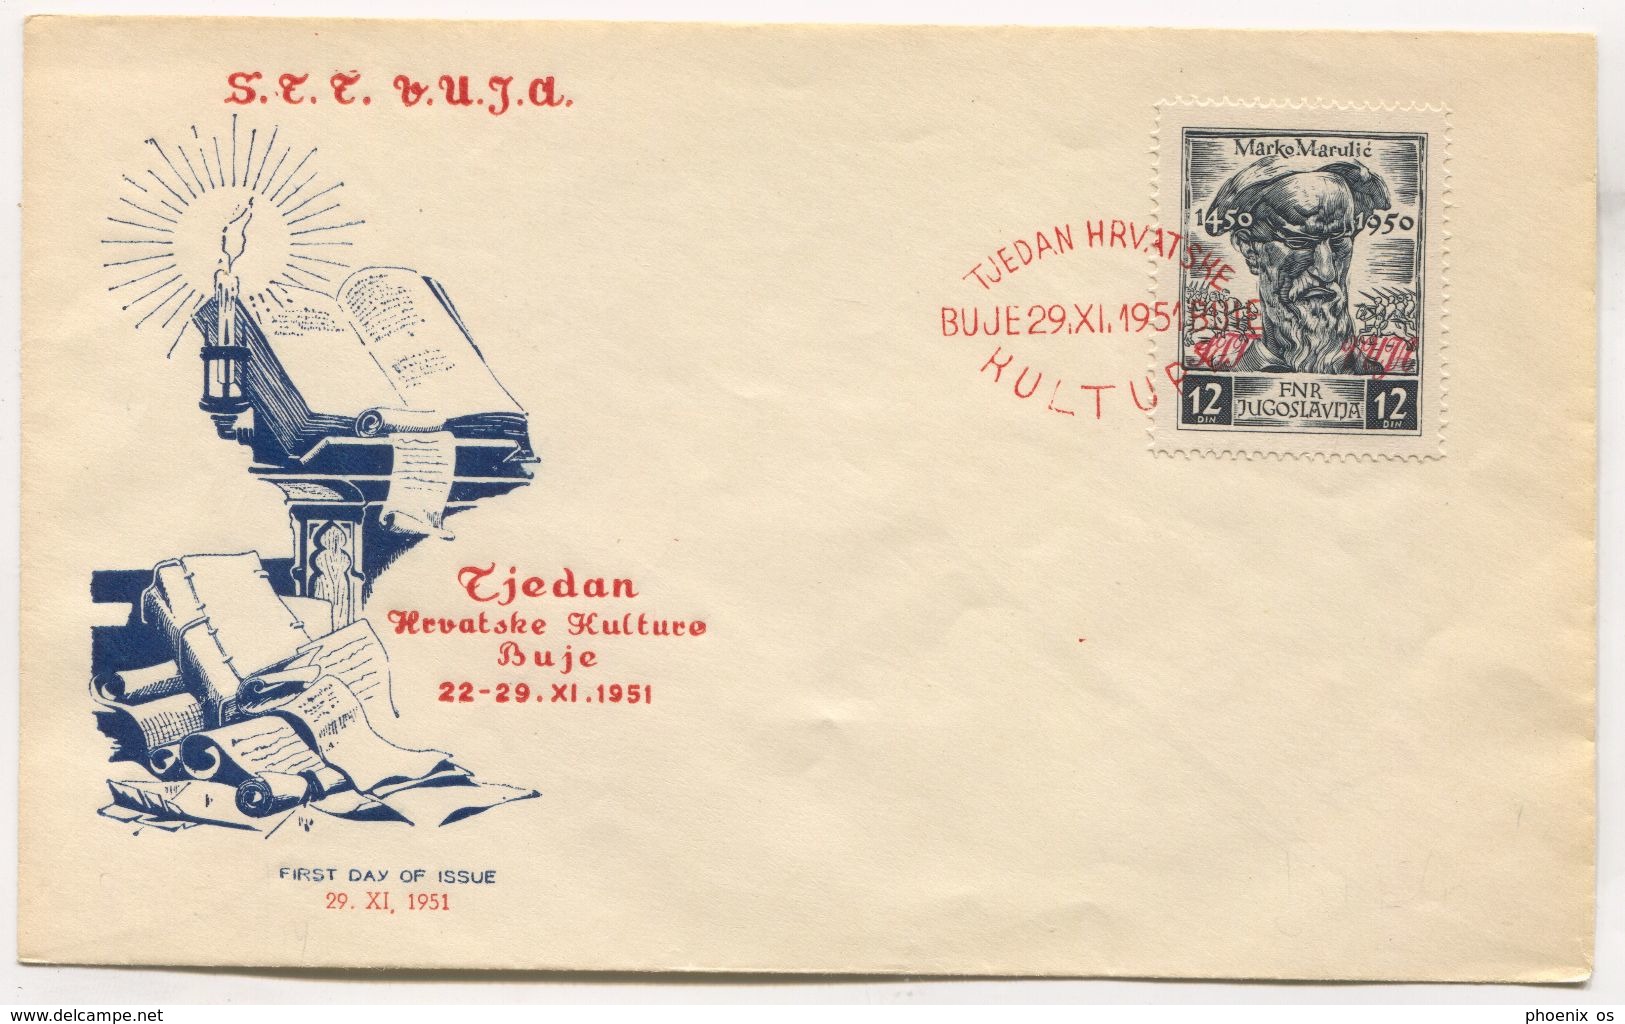 ITALY 1951. STT VUJA / FDC COVER, BUJE / BUIE, ISTRA ISTRIA - Marcophilia